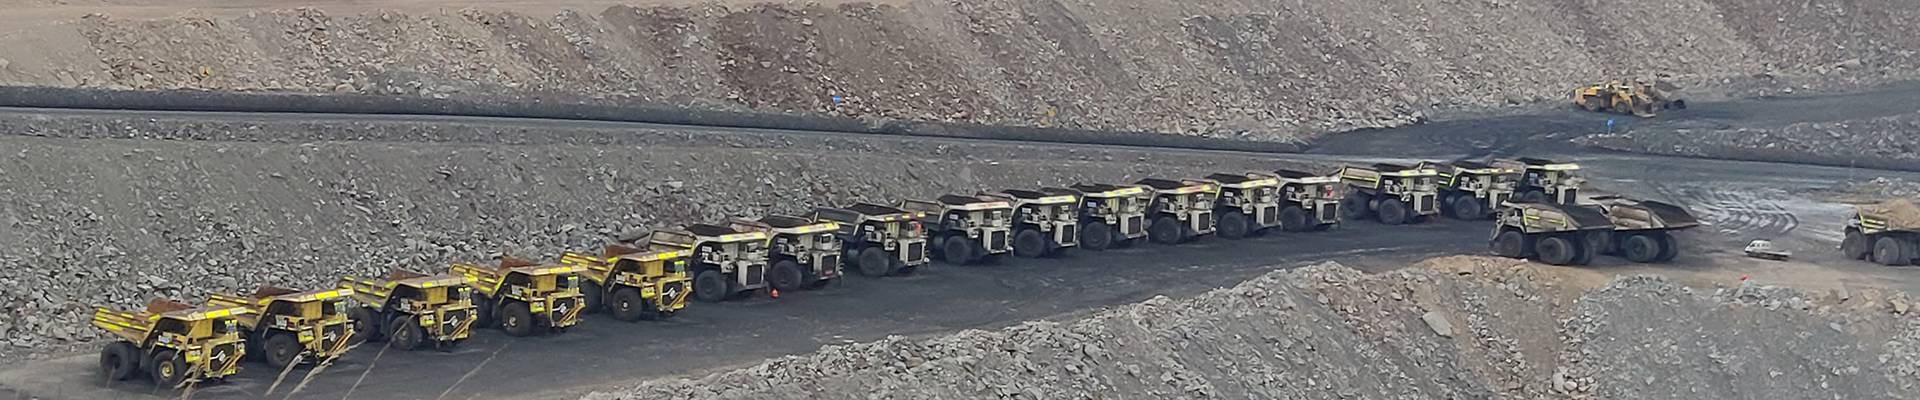 Cheap Mining Industry Tires 